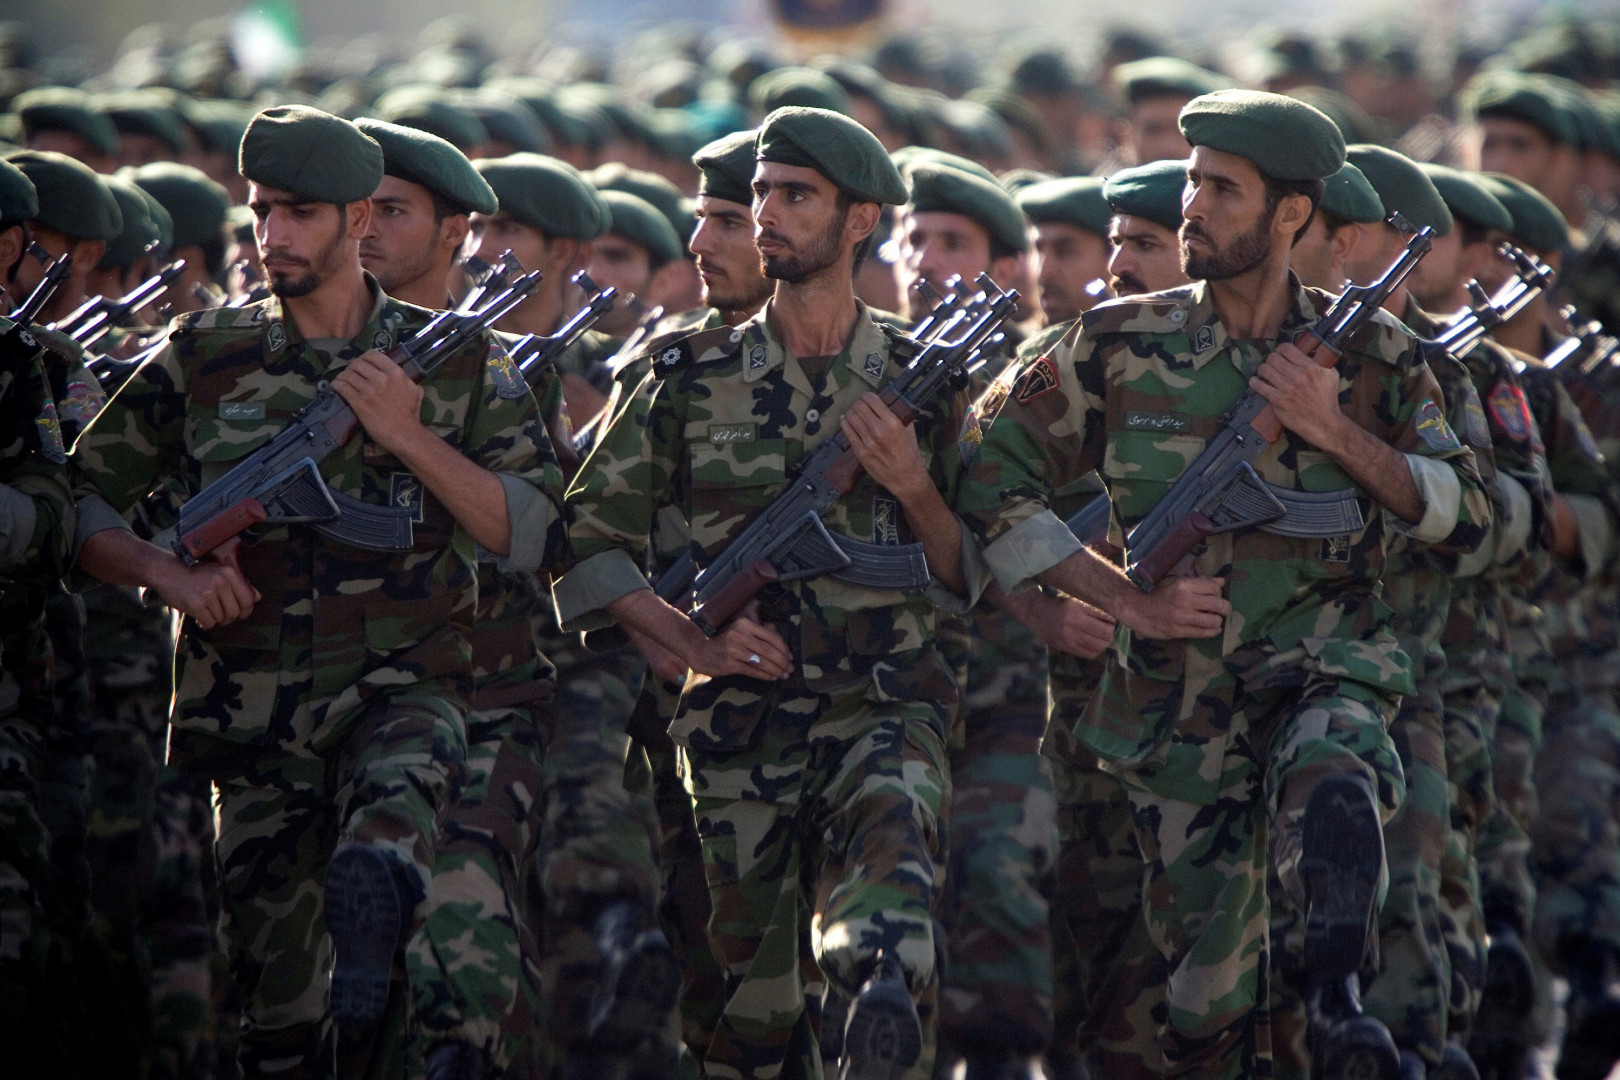 IRGC threats the EU with "Consequences" if listed as a "terrorist"